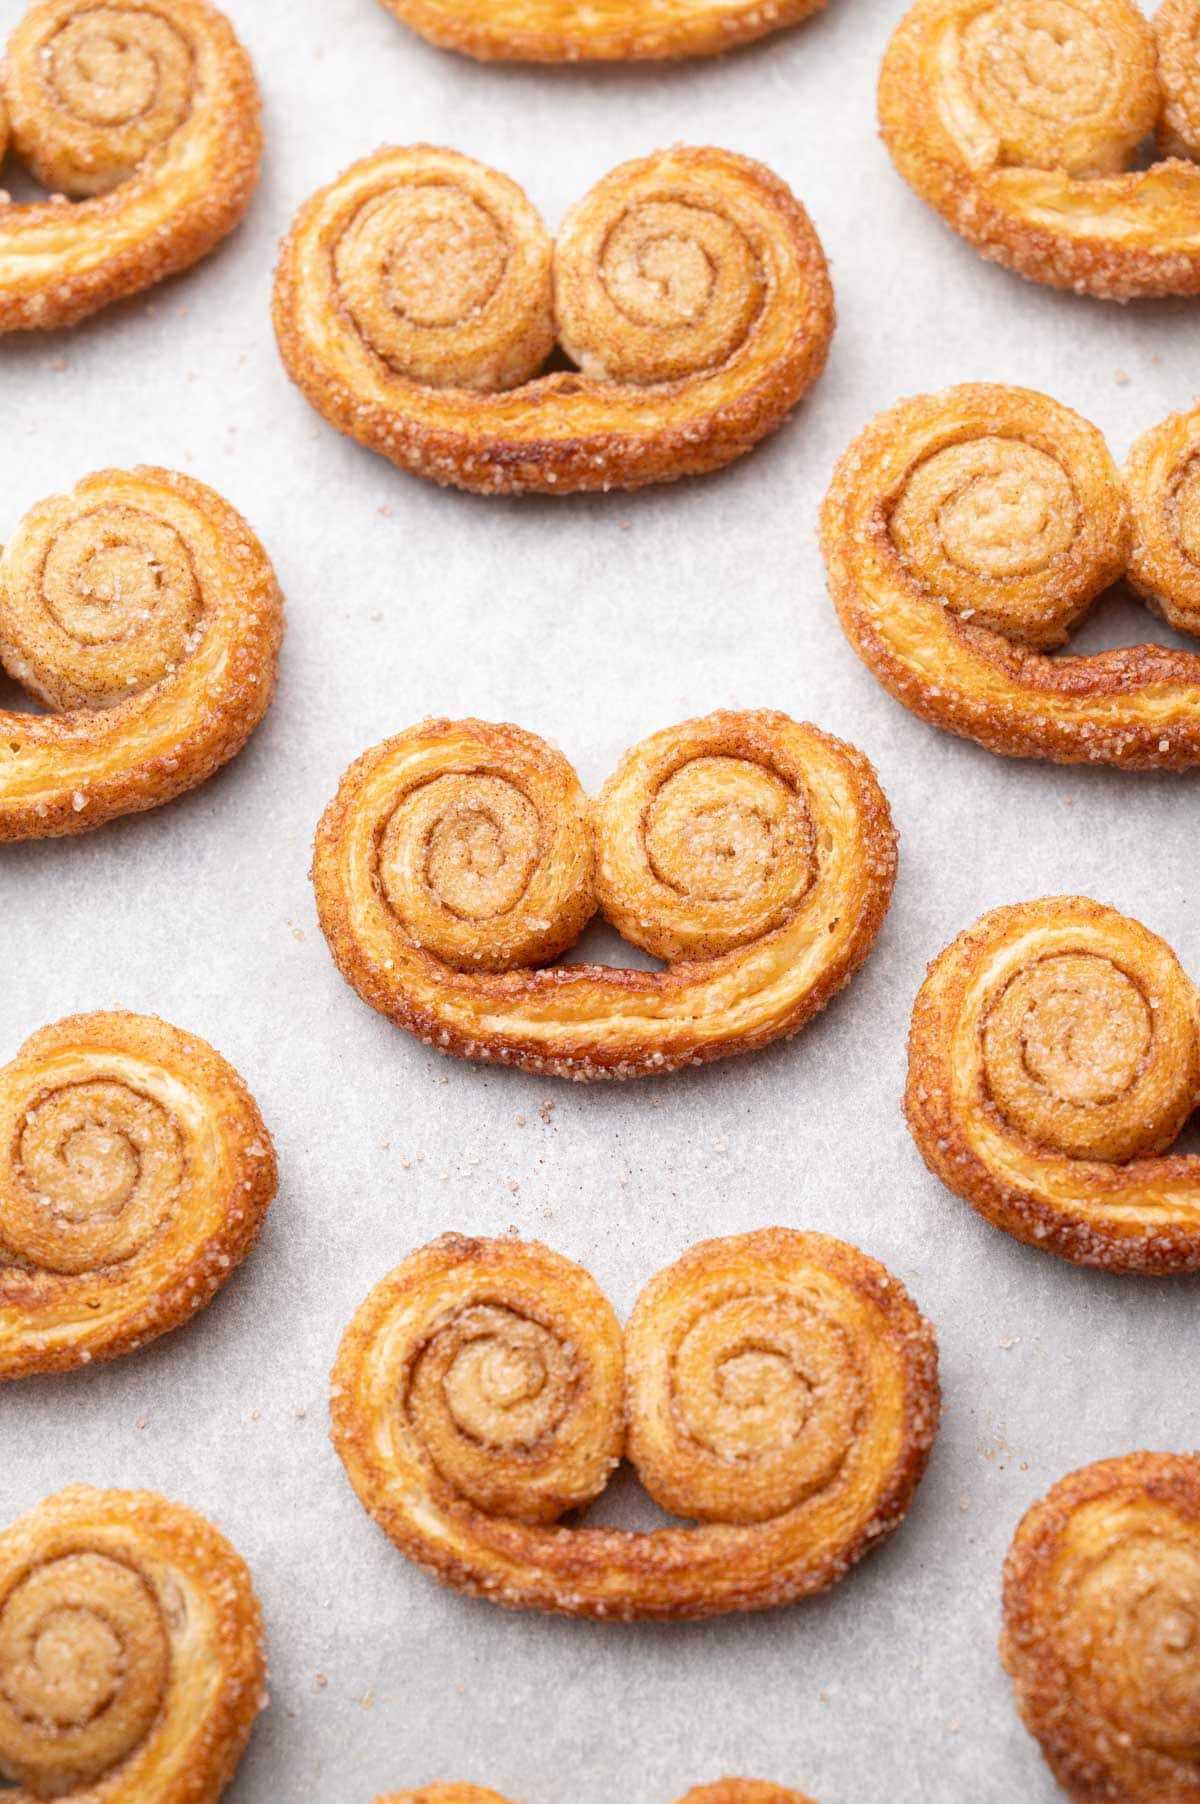 Freshly baked palmiers cookies on a baking sheet lined with parchment paper.